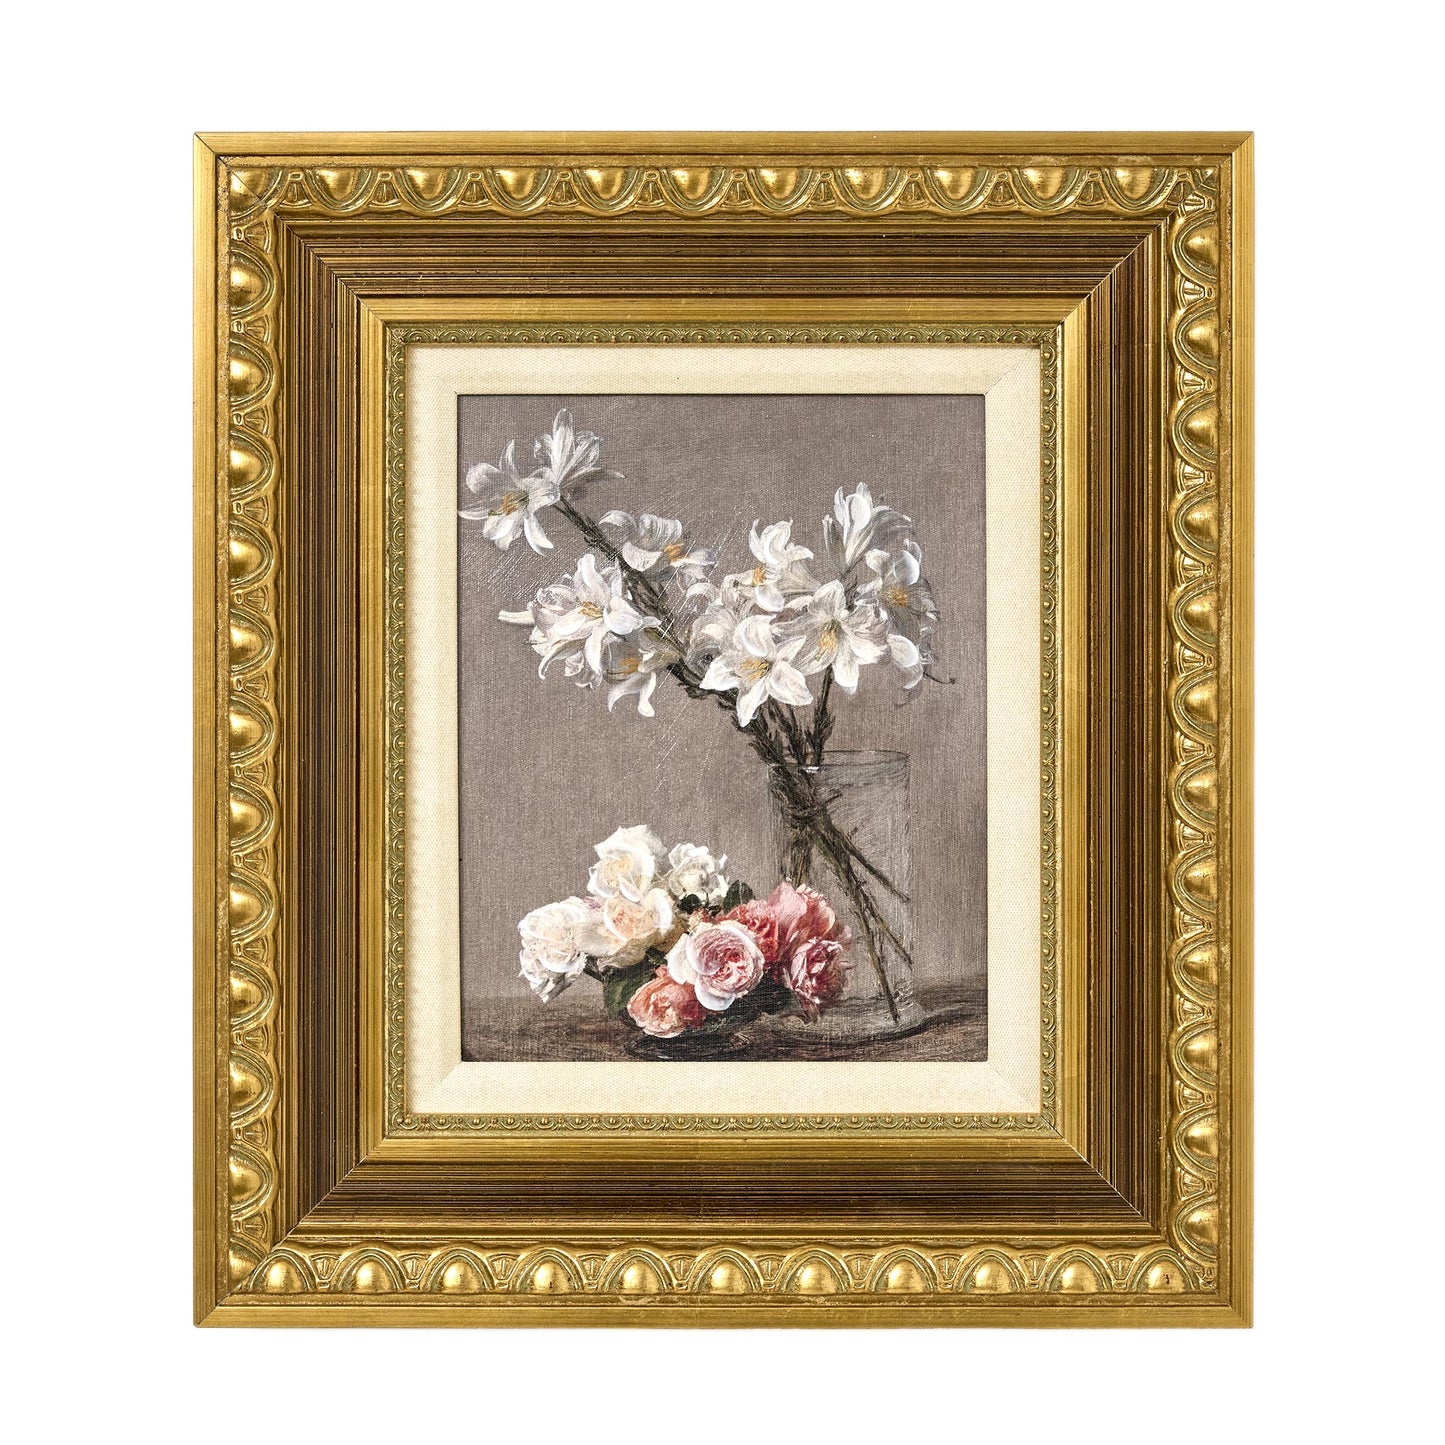 Ornate Framed Roses and Liles Canvas Print by Henri Fantin-Latour 14.75" x 16.75"